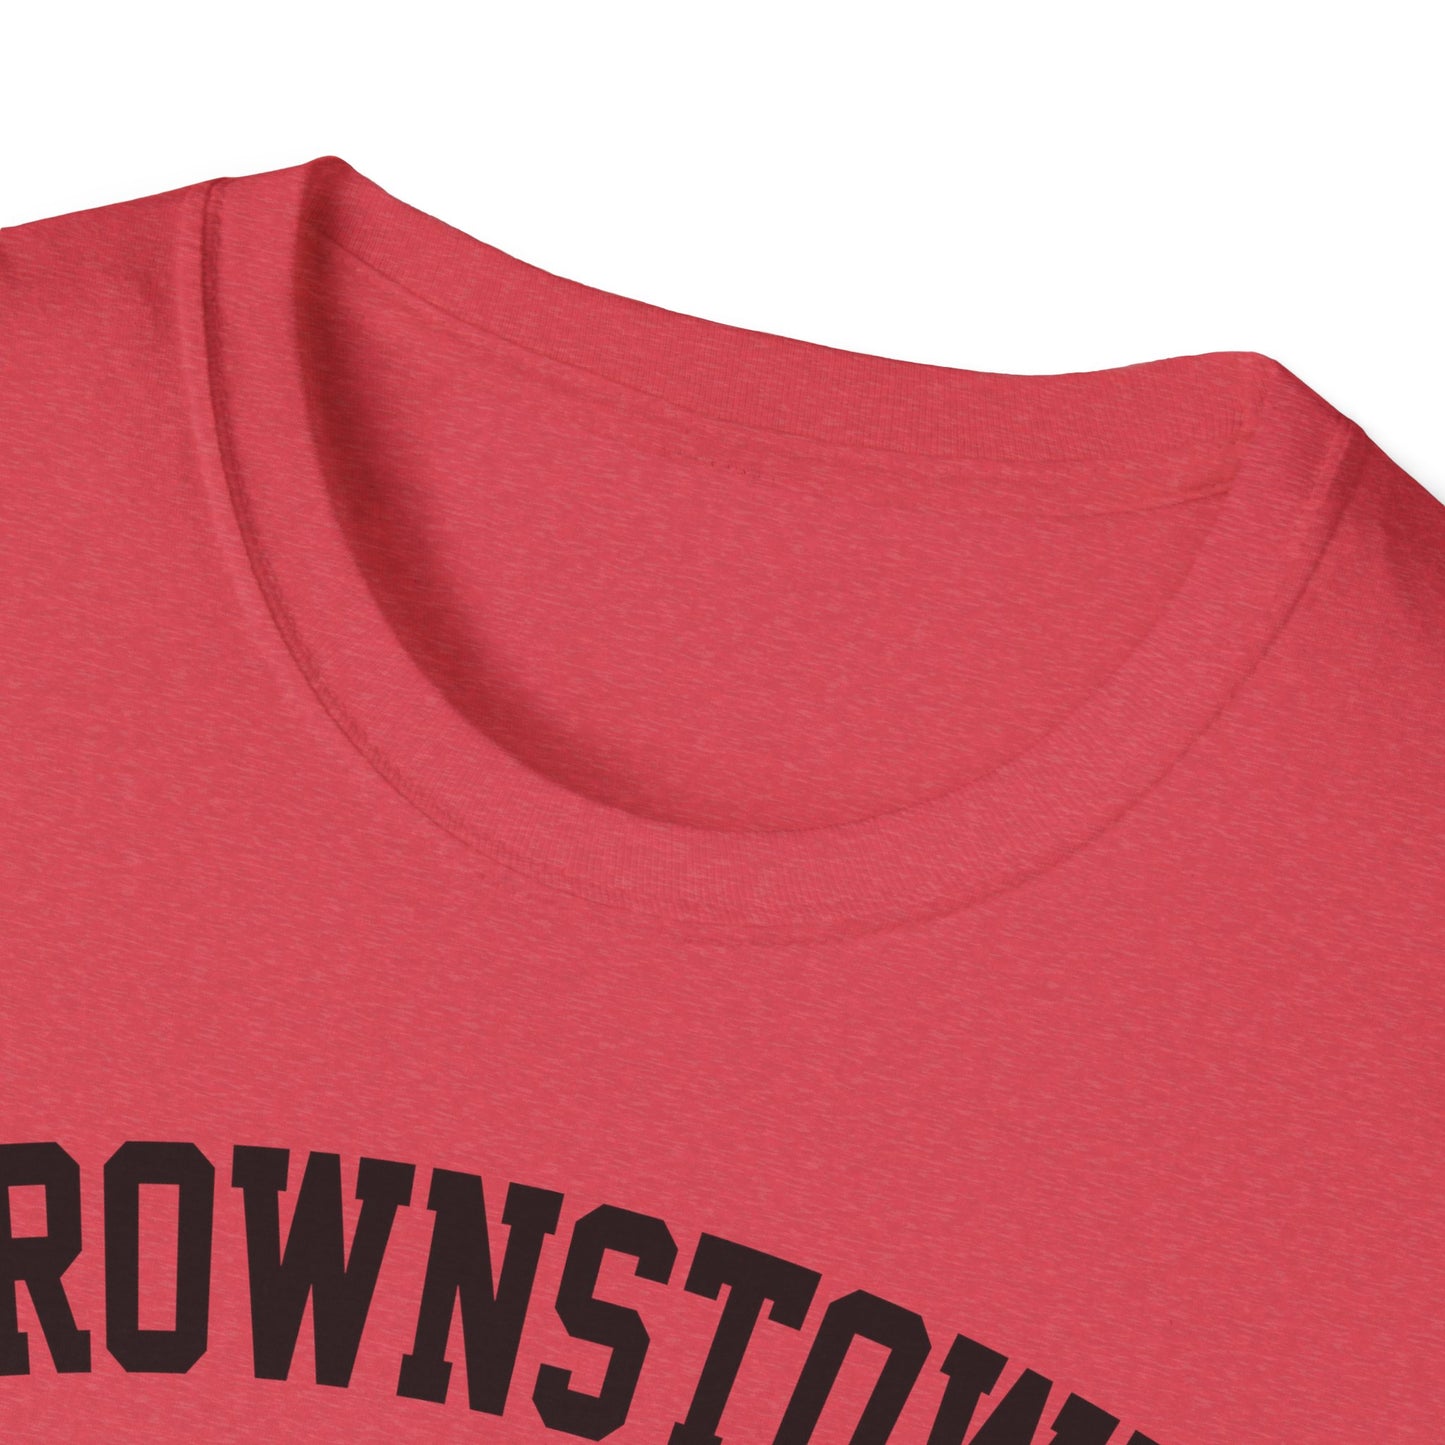 Brownstown Braves Unisex Softstyle T-Shirt